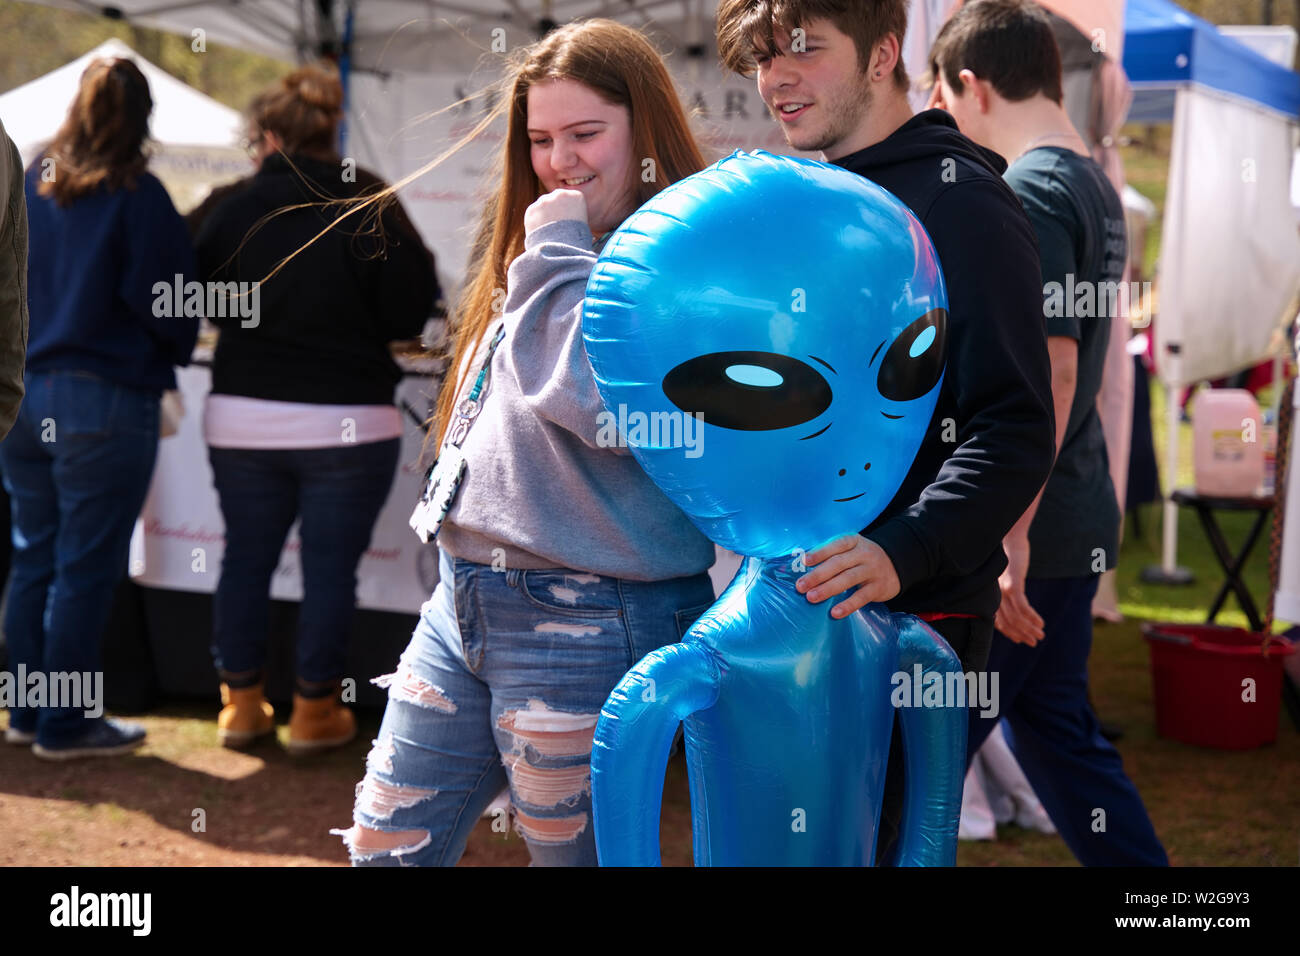 Meriden, CT USA. Apr 2019. Daffodil Festival. Couple holding an alien inflatable hostage. Stock Photo